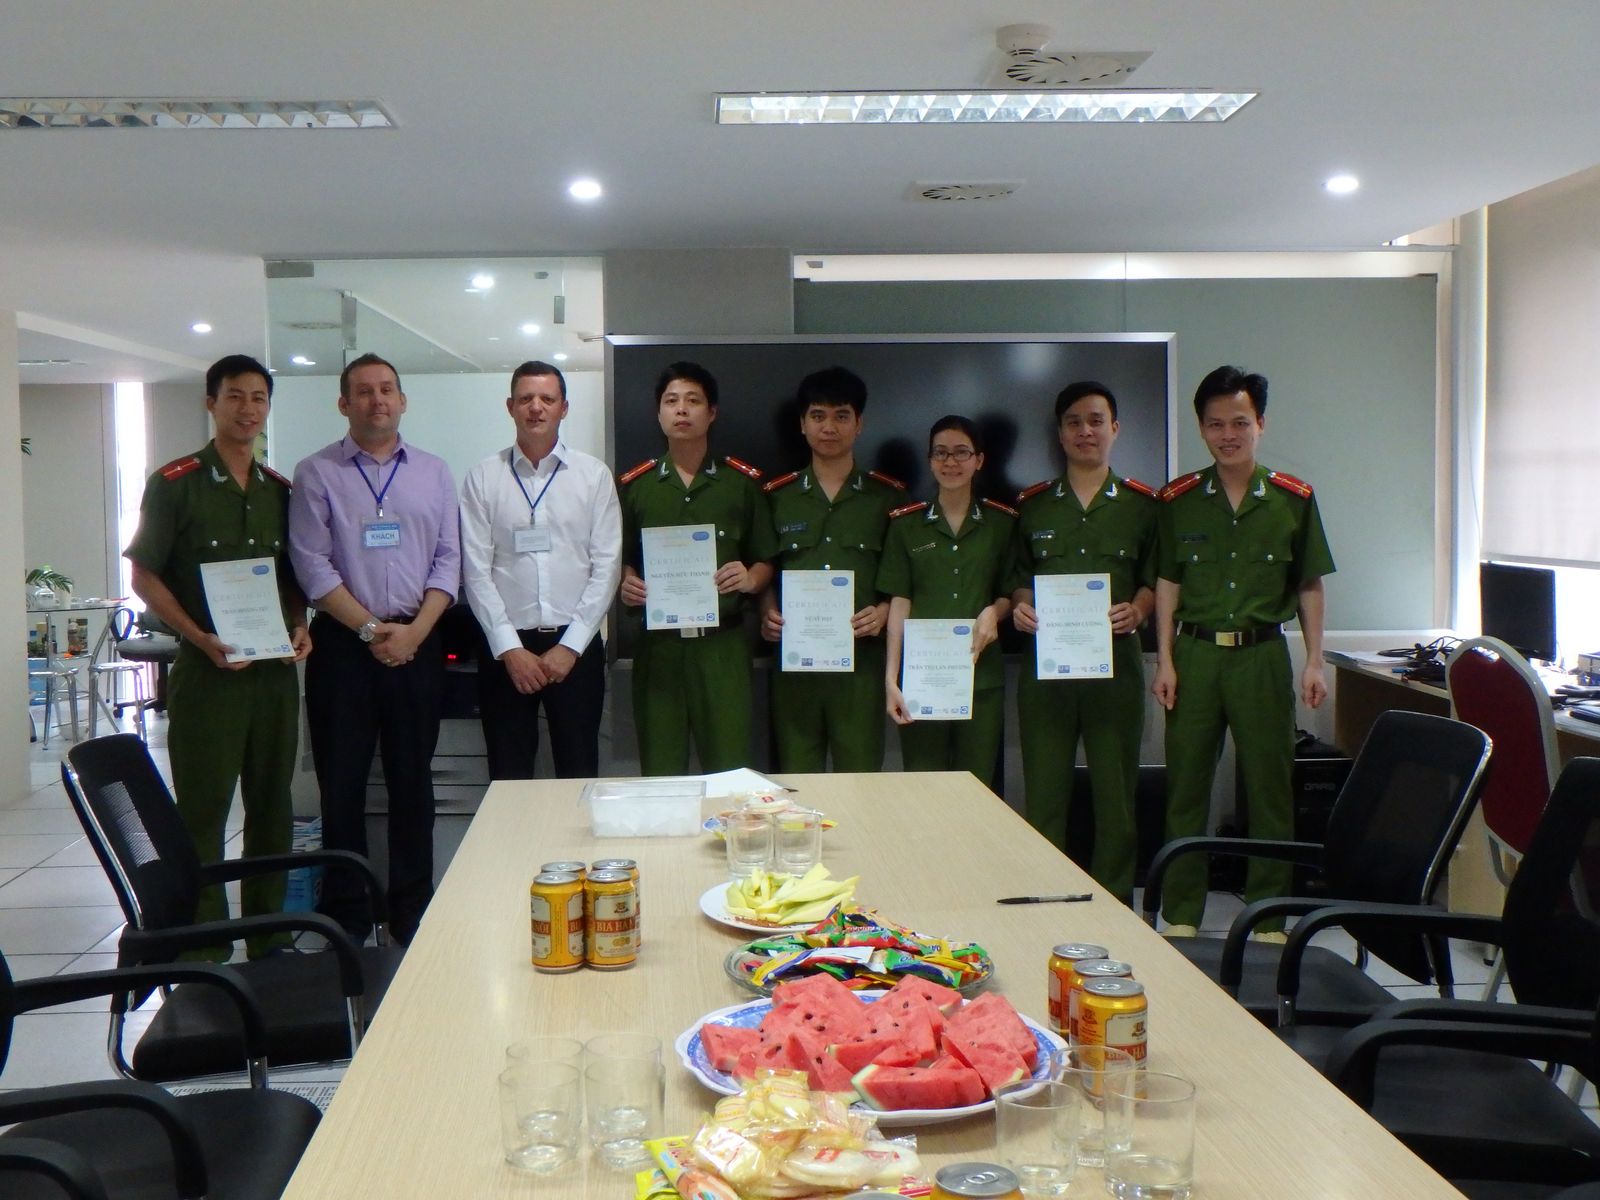 A group of officers standing in front of a table with a certificate